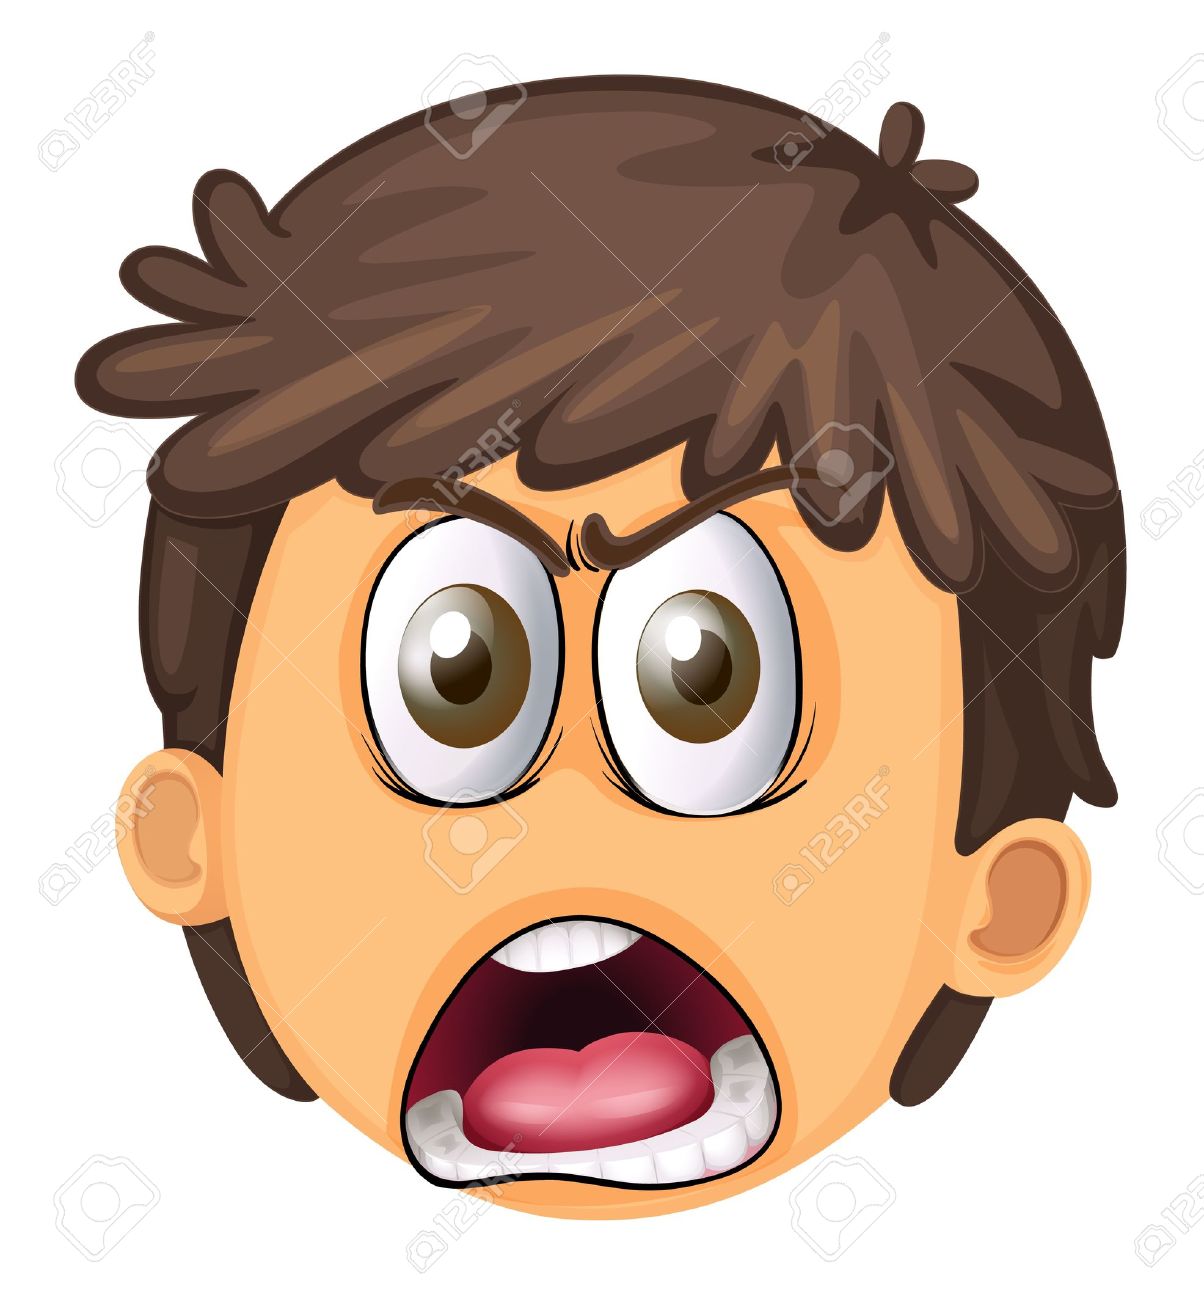 Anger clipart #6, Download drawings